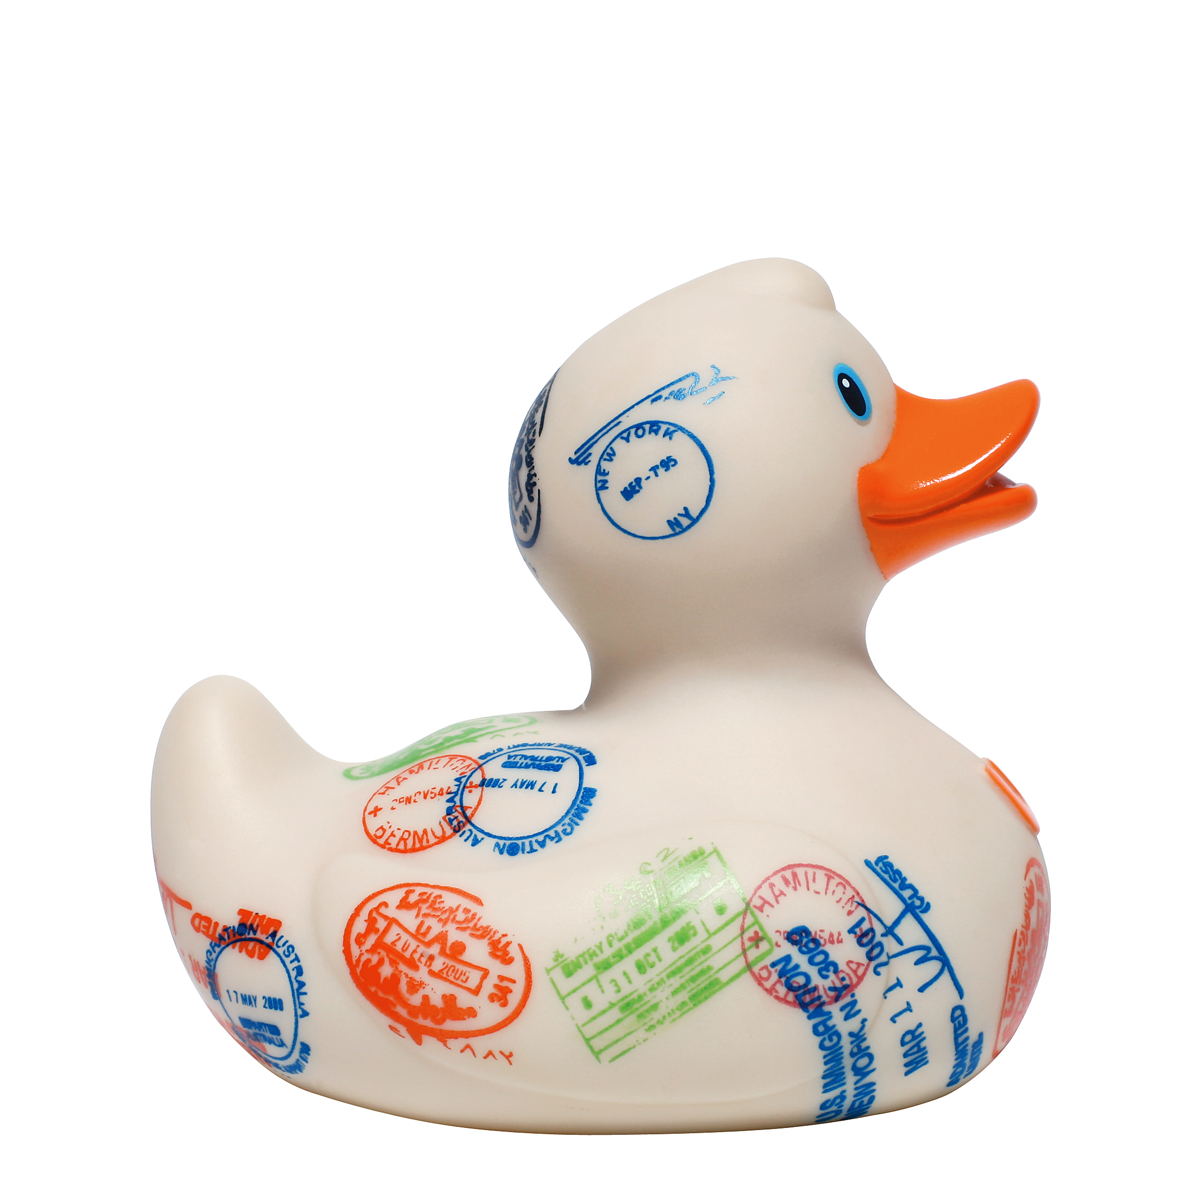 Bud Duck Deluxe Diva 10cm Collectable Bath Toy Ducks Novelty Collector's Gift 